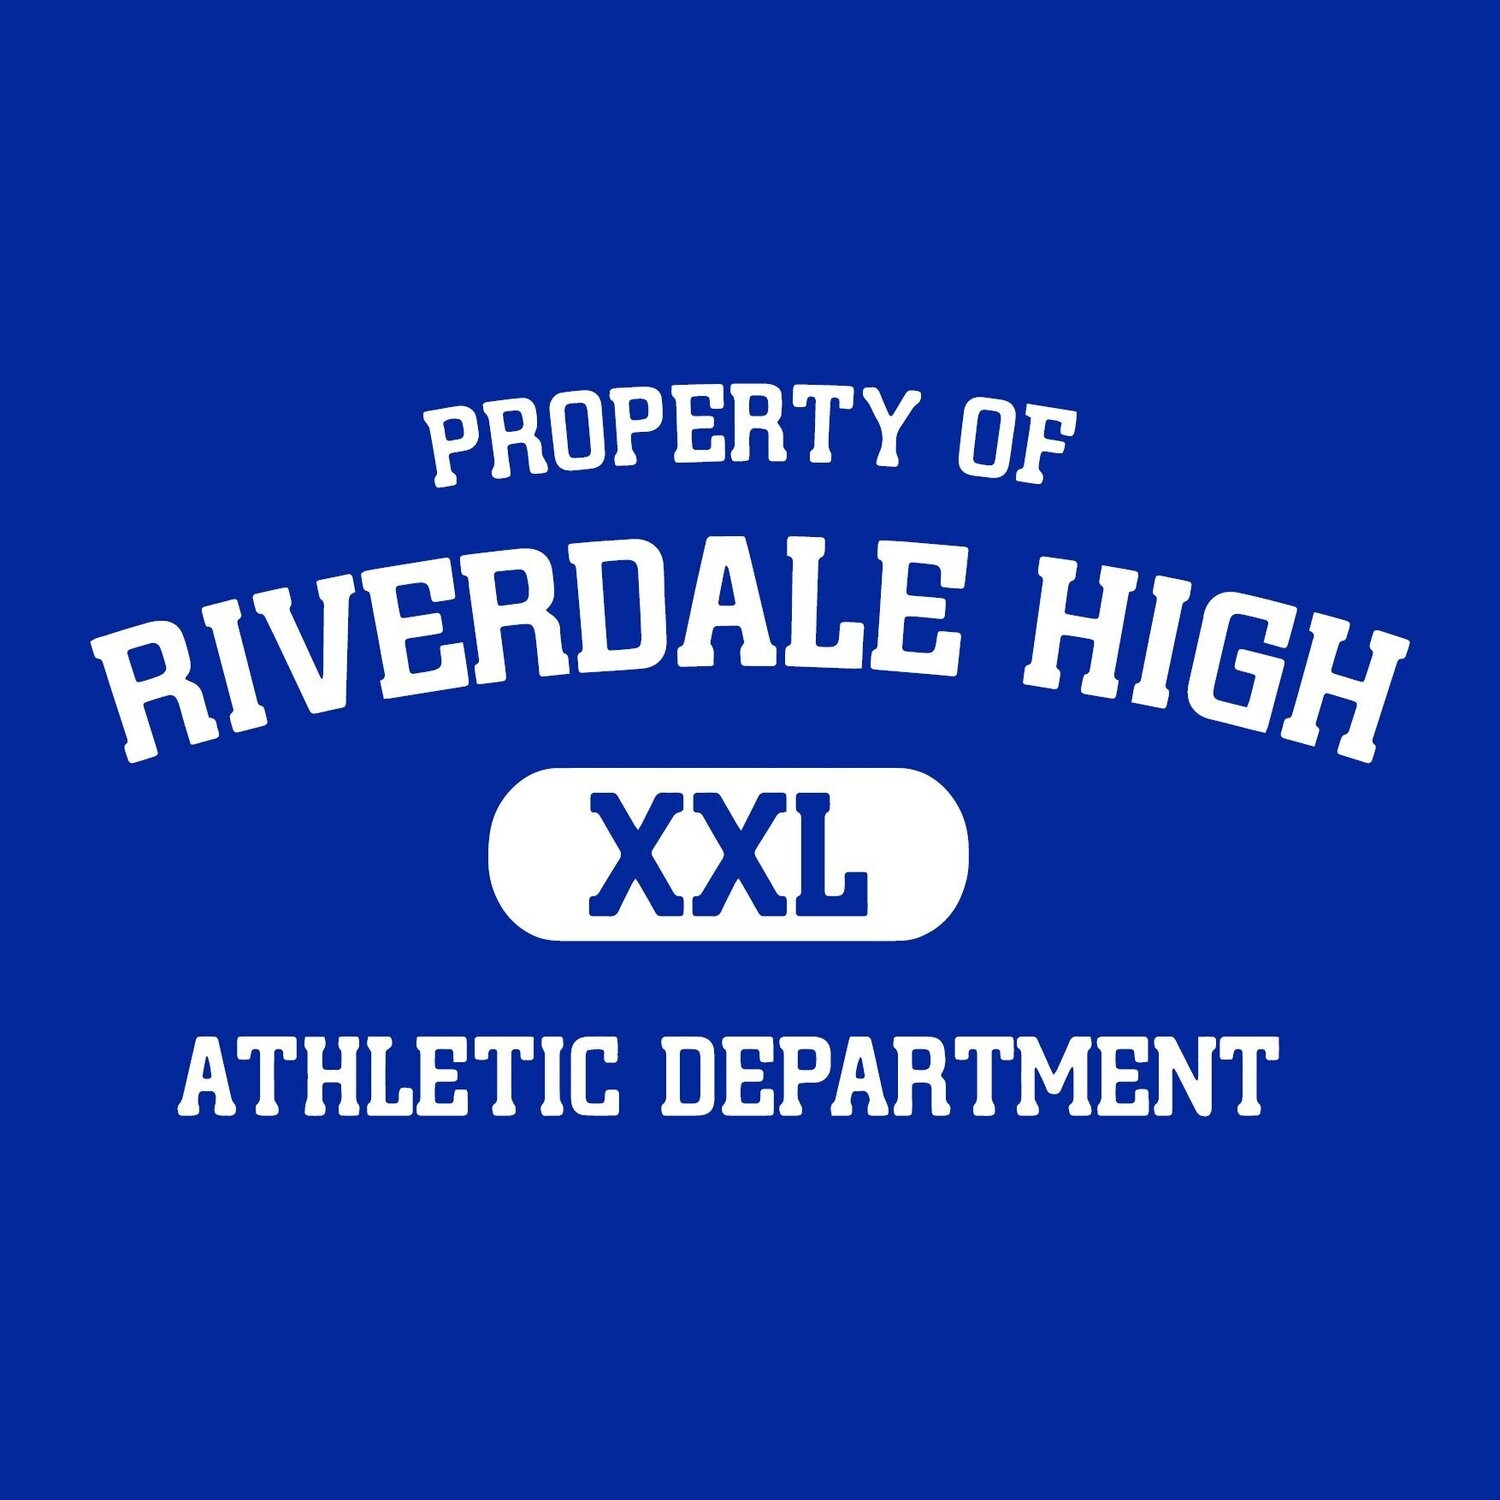 Camiseta Property of Riverdale High XXL Athletic Department